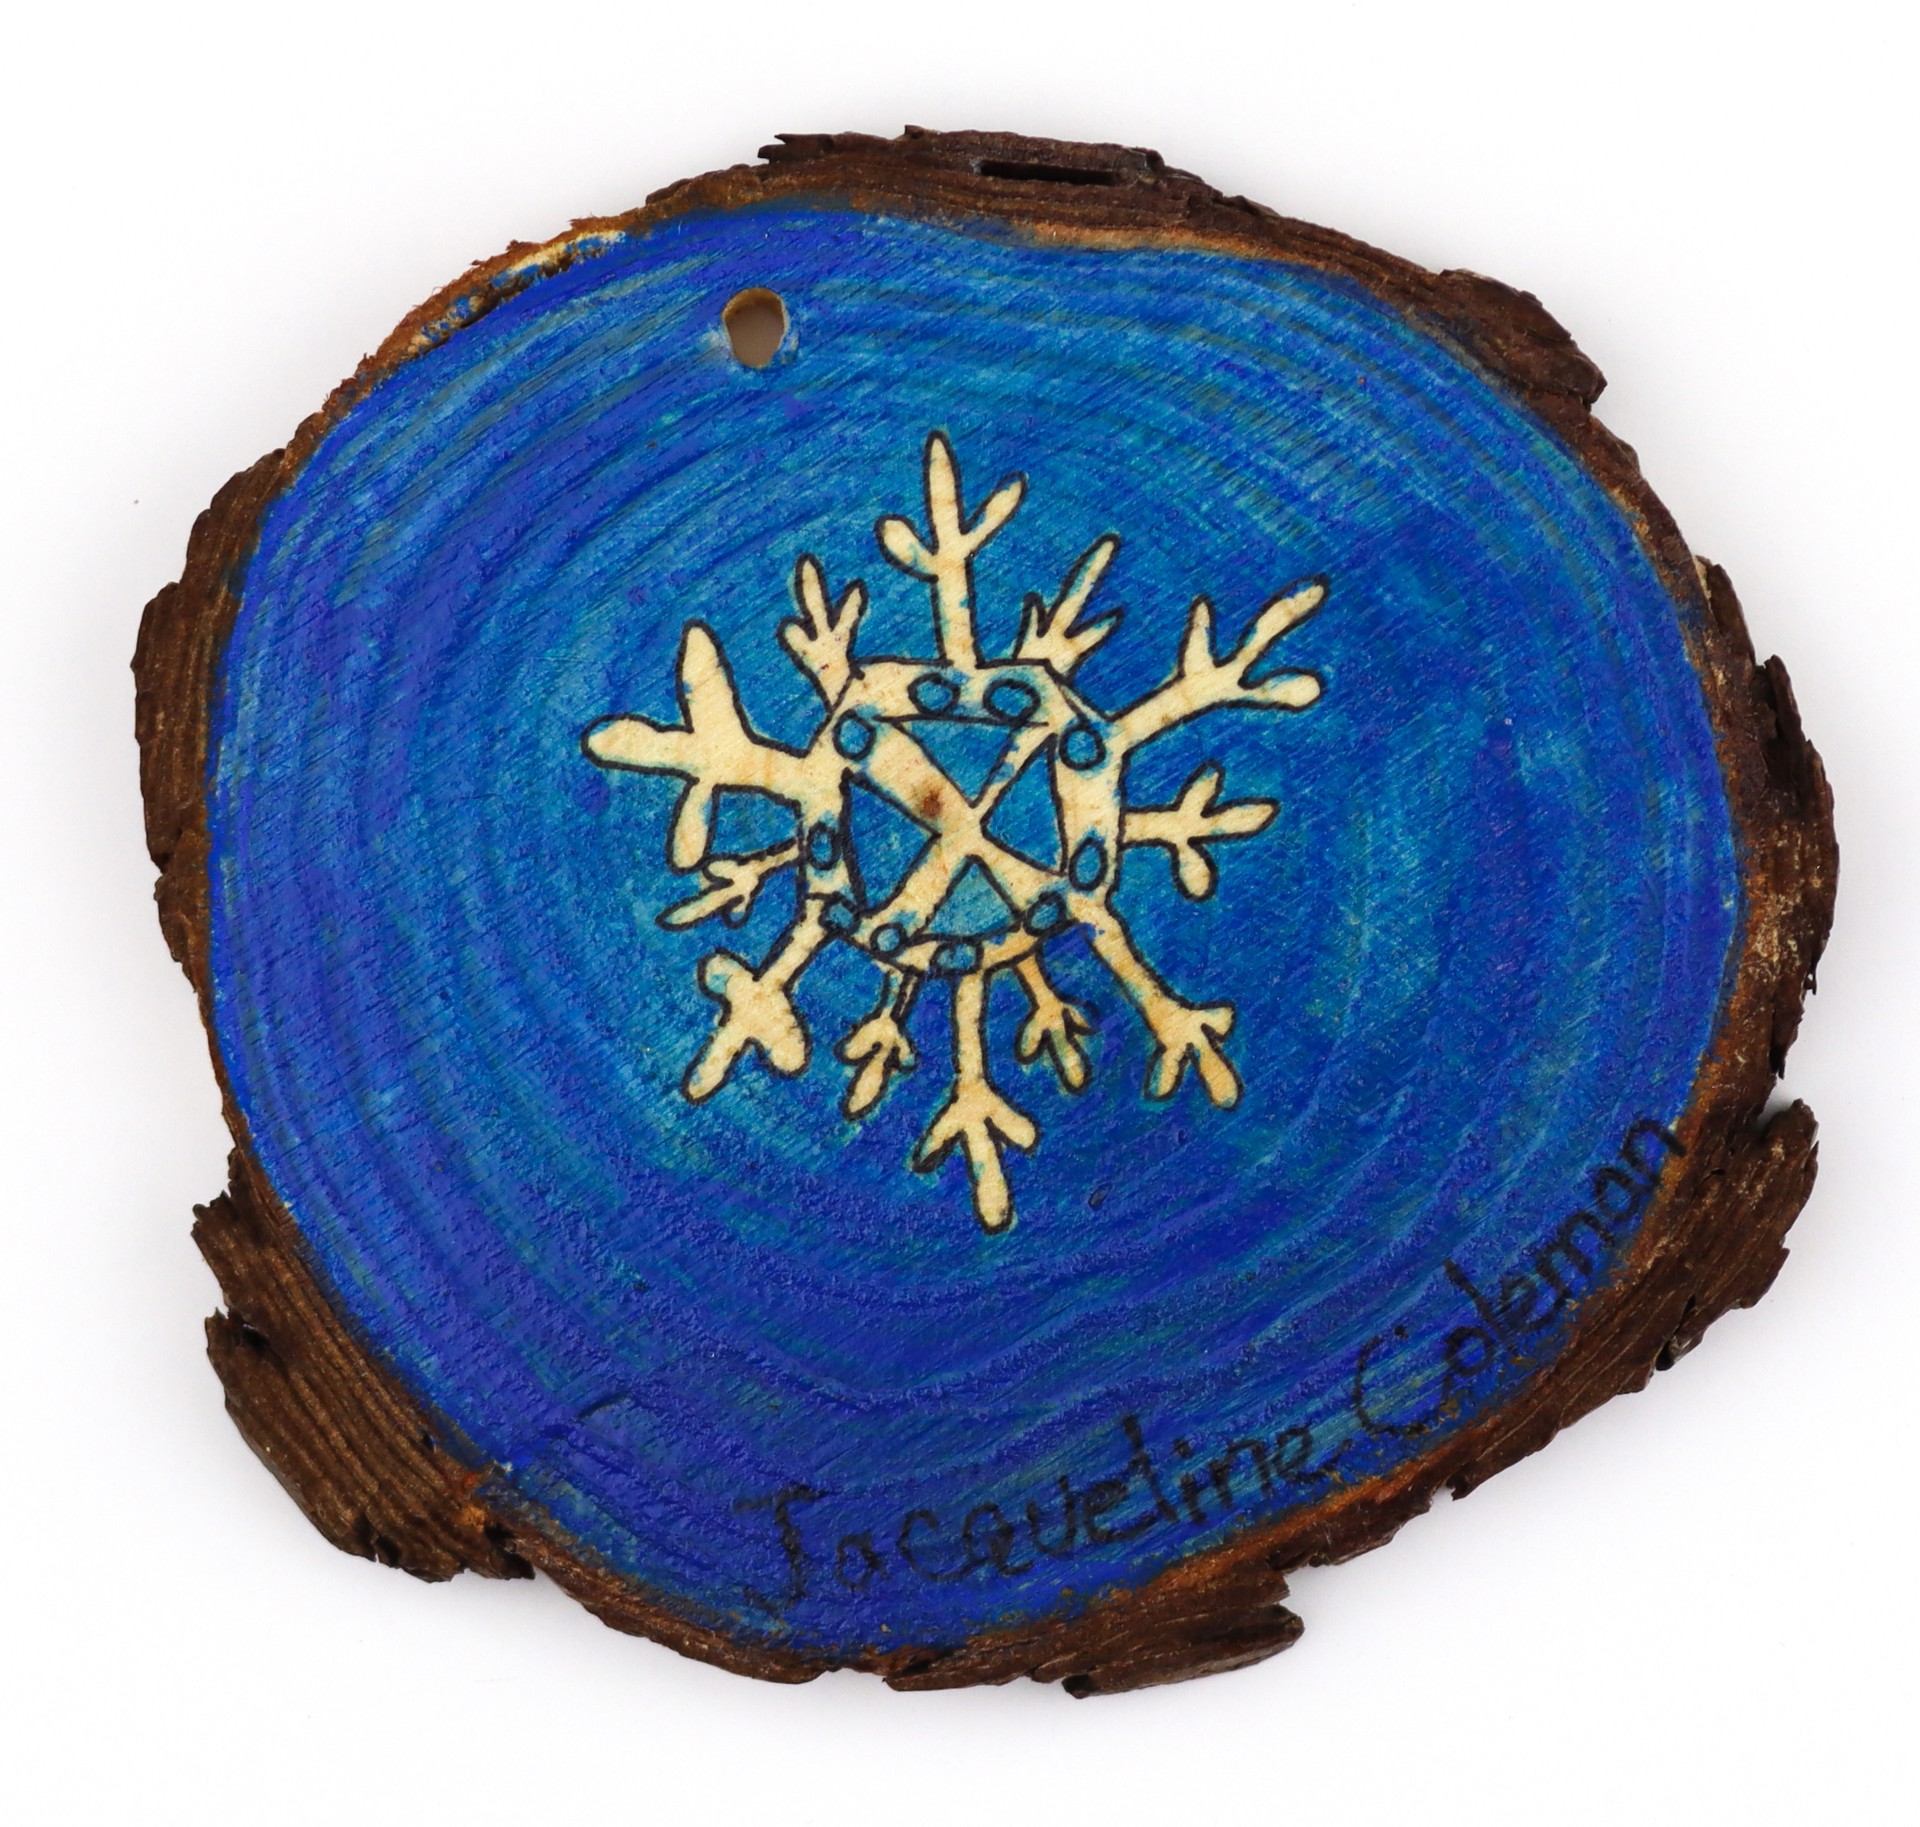 Gingerbread & Snowflake (ornament) by Jacqueline Coleman